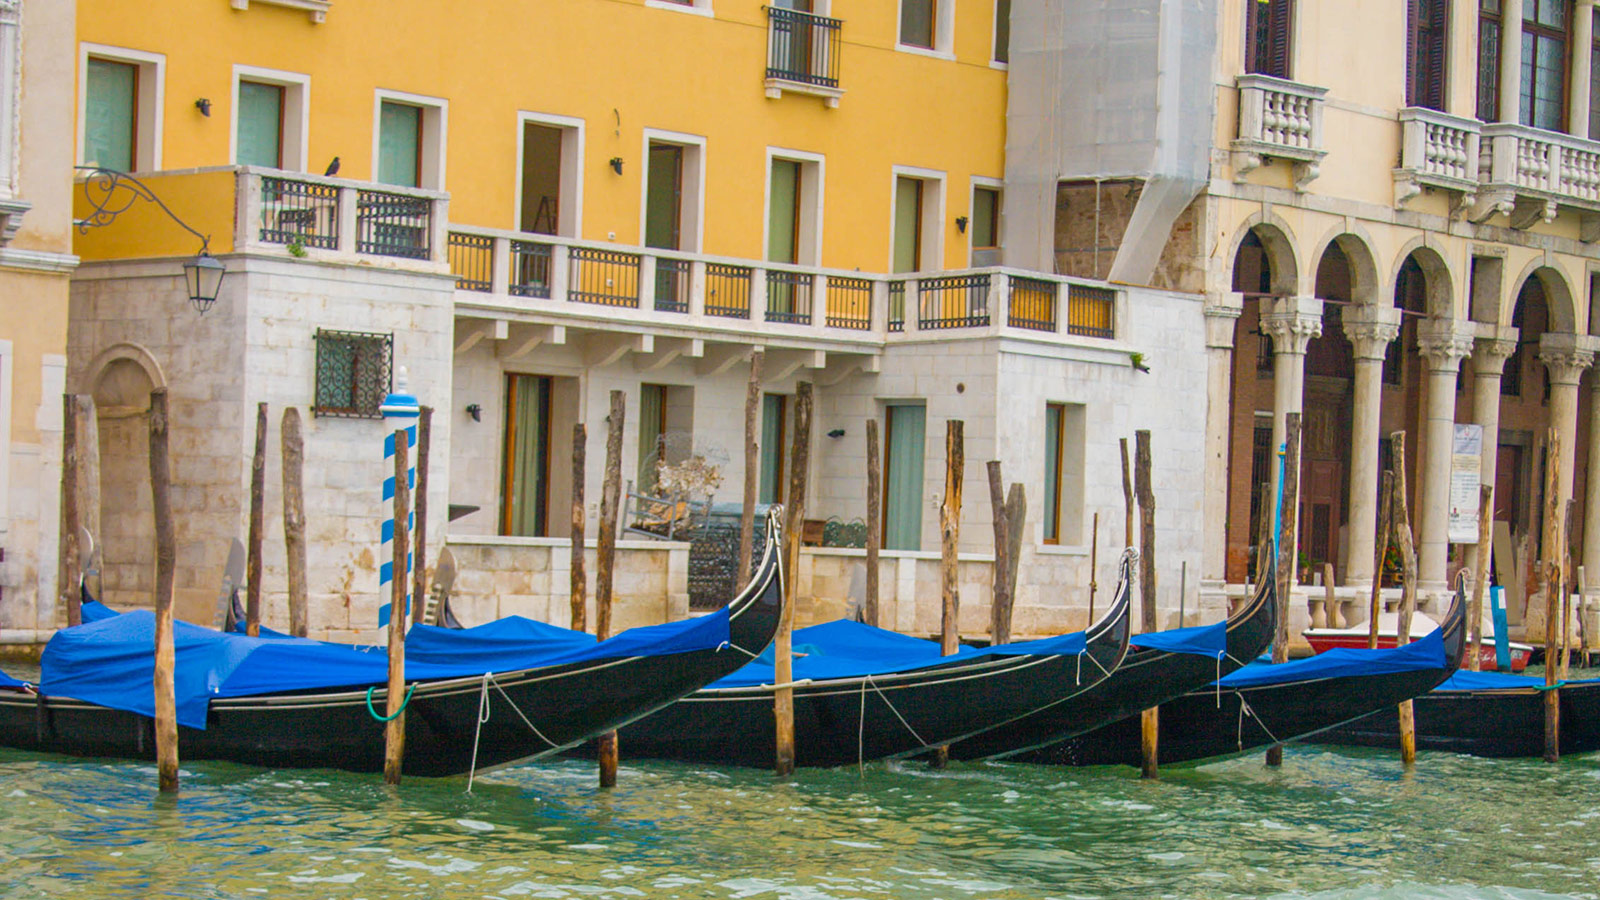 Venetial gondolas covered in blue sit docked against a yellow building